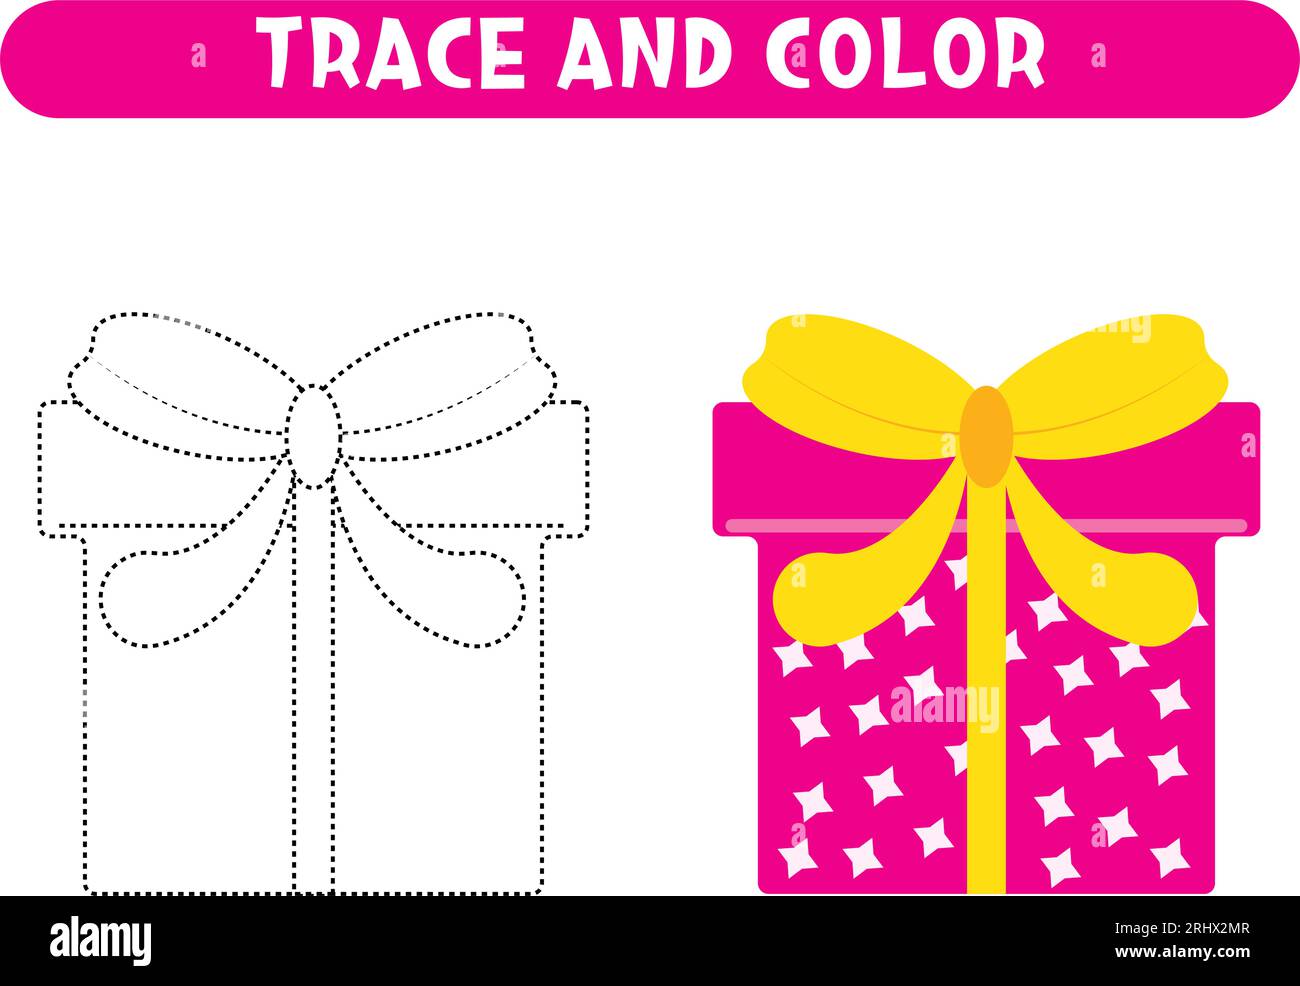 Trace and color gift box. Worksheet for kids Stock Vector